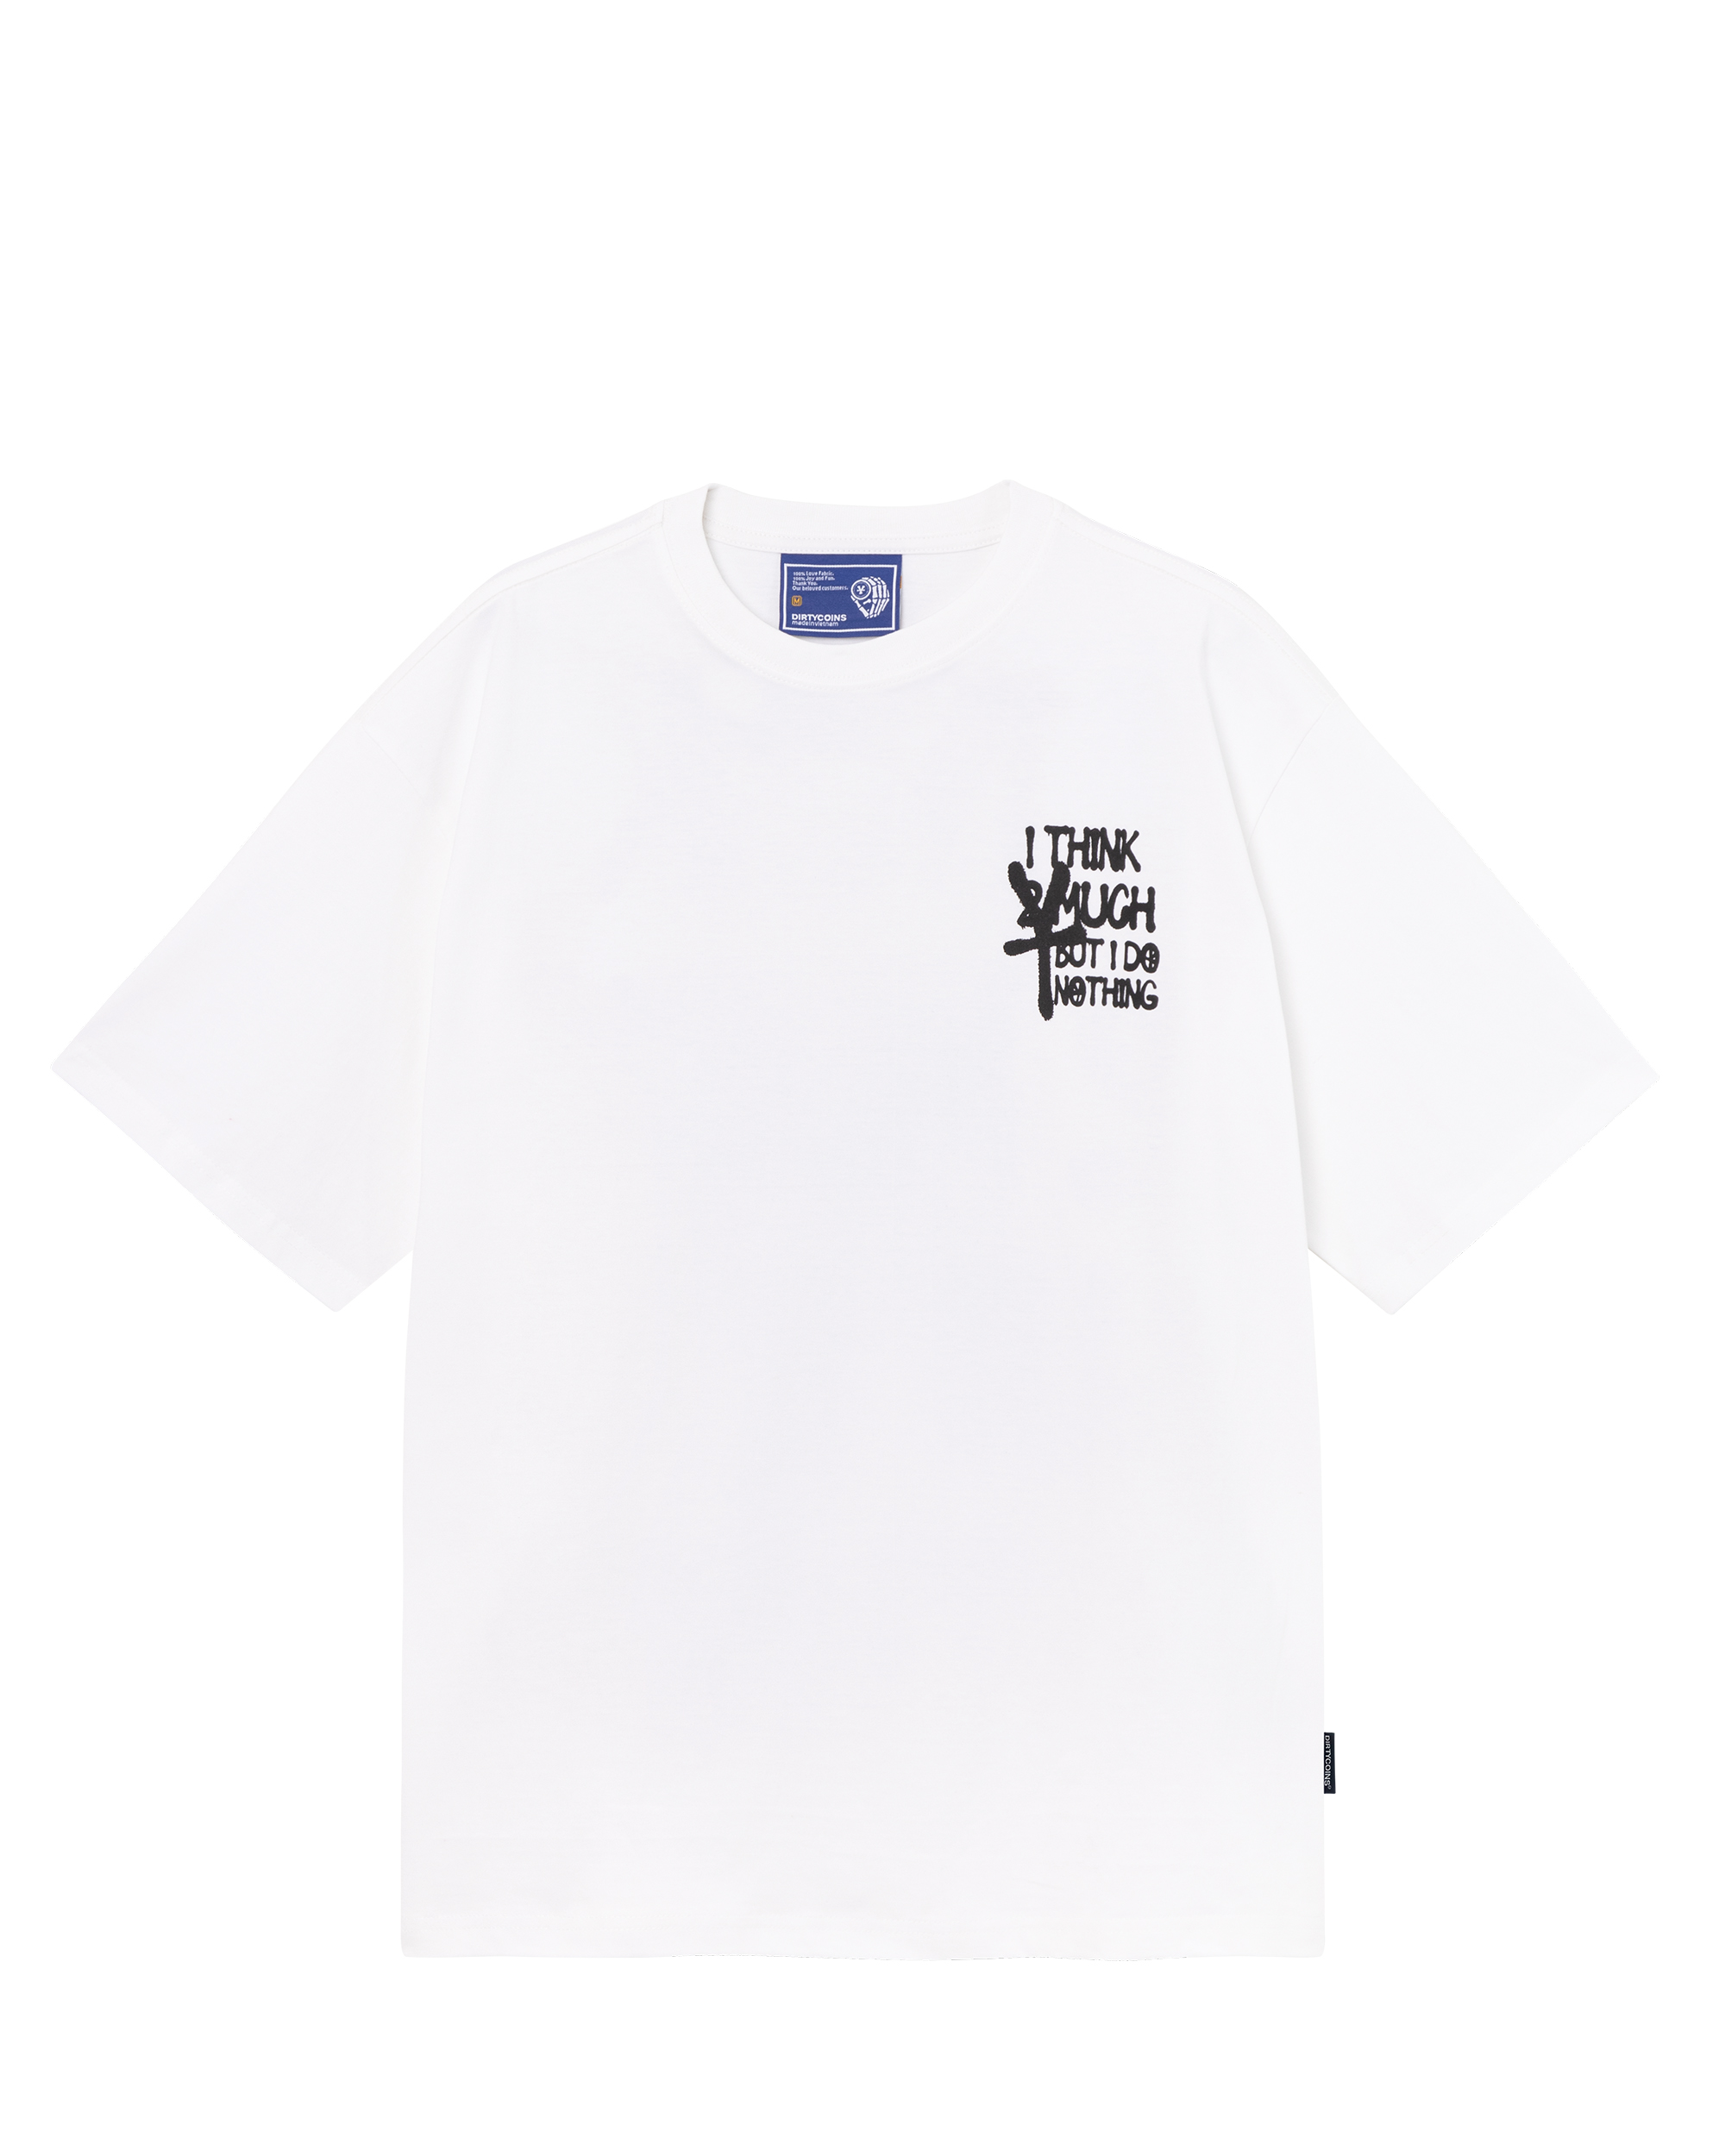 DirtyCoins IThink2Much T-shirt - White